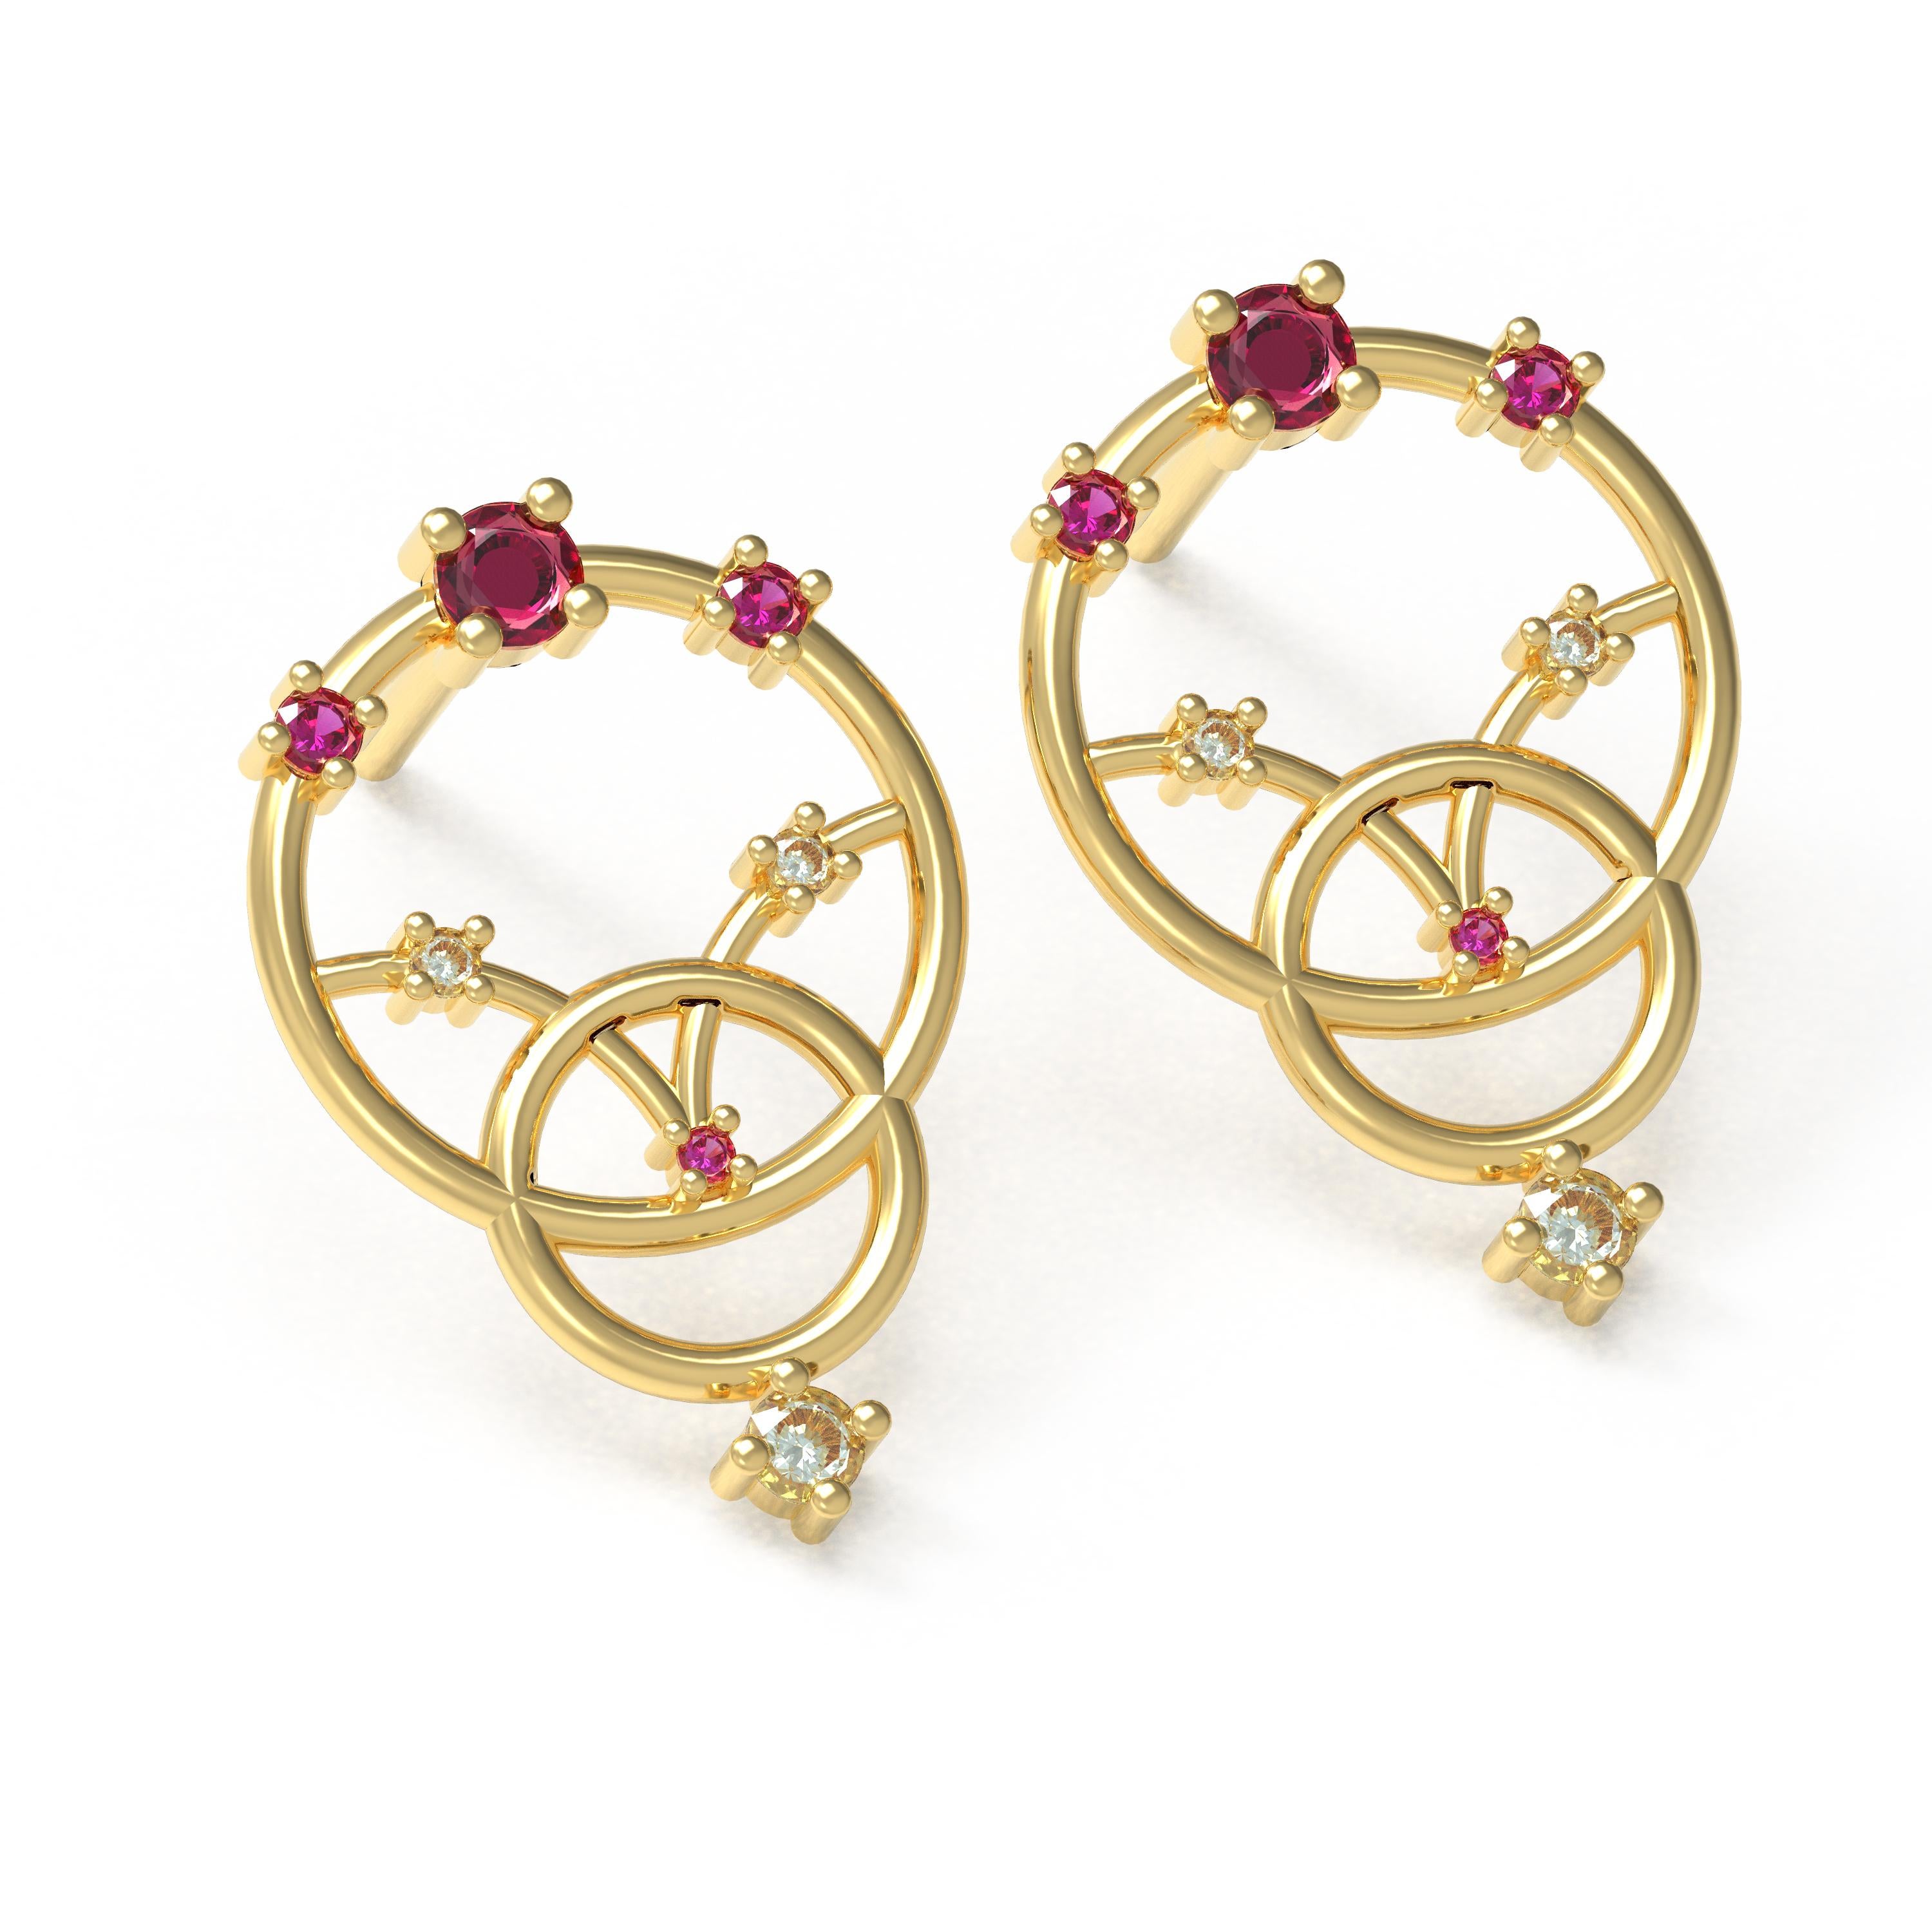 Designer: Alexia Gryllaki
Dimensions: L18x12mm
Weight: approximately 3.4g (pair)
Barcode: ING033E

The Interlocking Geometry earrings in 18 karat yellow gold with rubies approx. 0.24cts and round brilliant-cut diamonds approx. 0.13cts.

About the